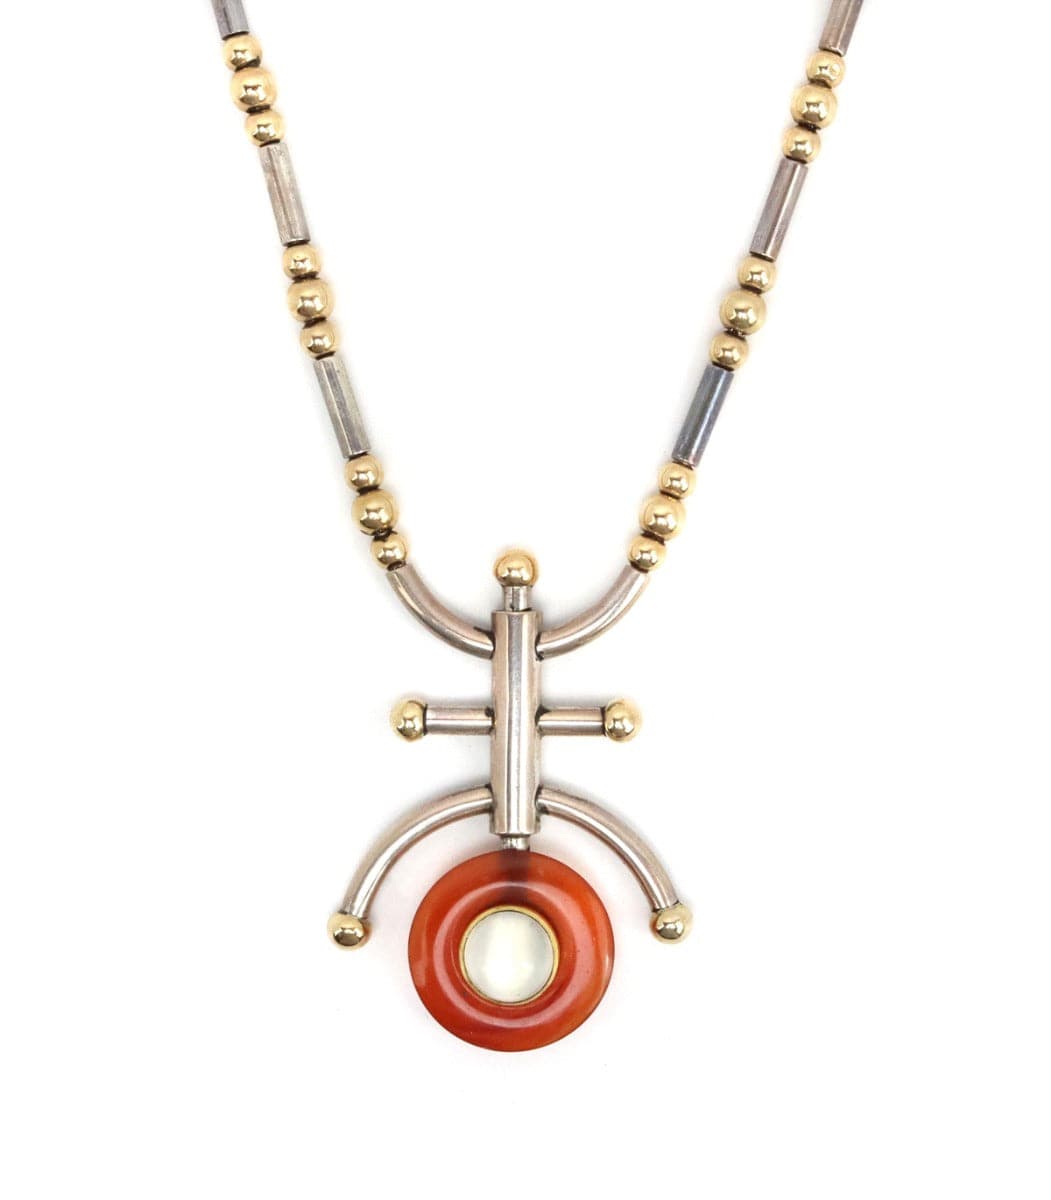 Frank Patania Jr. - Moonstone, Carnelian, and Sterling Silver Necklace, 22" length, 2.625" x 1.75" pendant (J91699-0123-034) 1